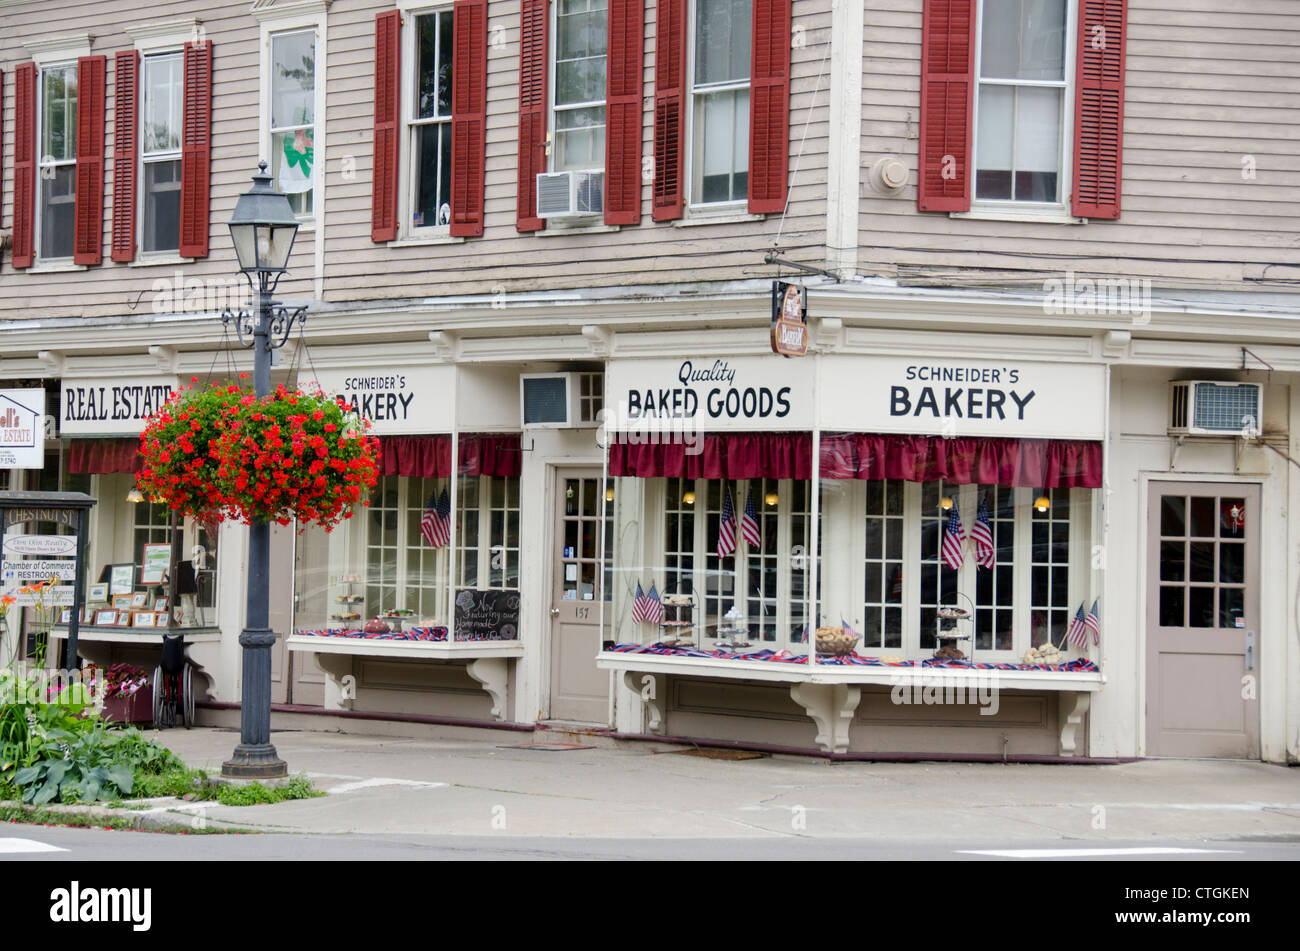 New York, Cooperstown. Downtown street scene of Cooperstown, bakery. Stock Photo